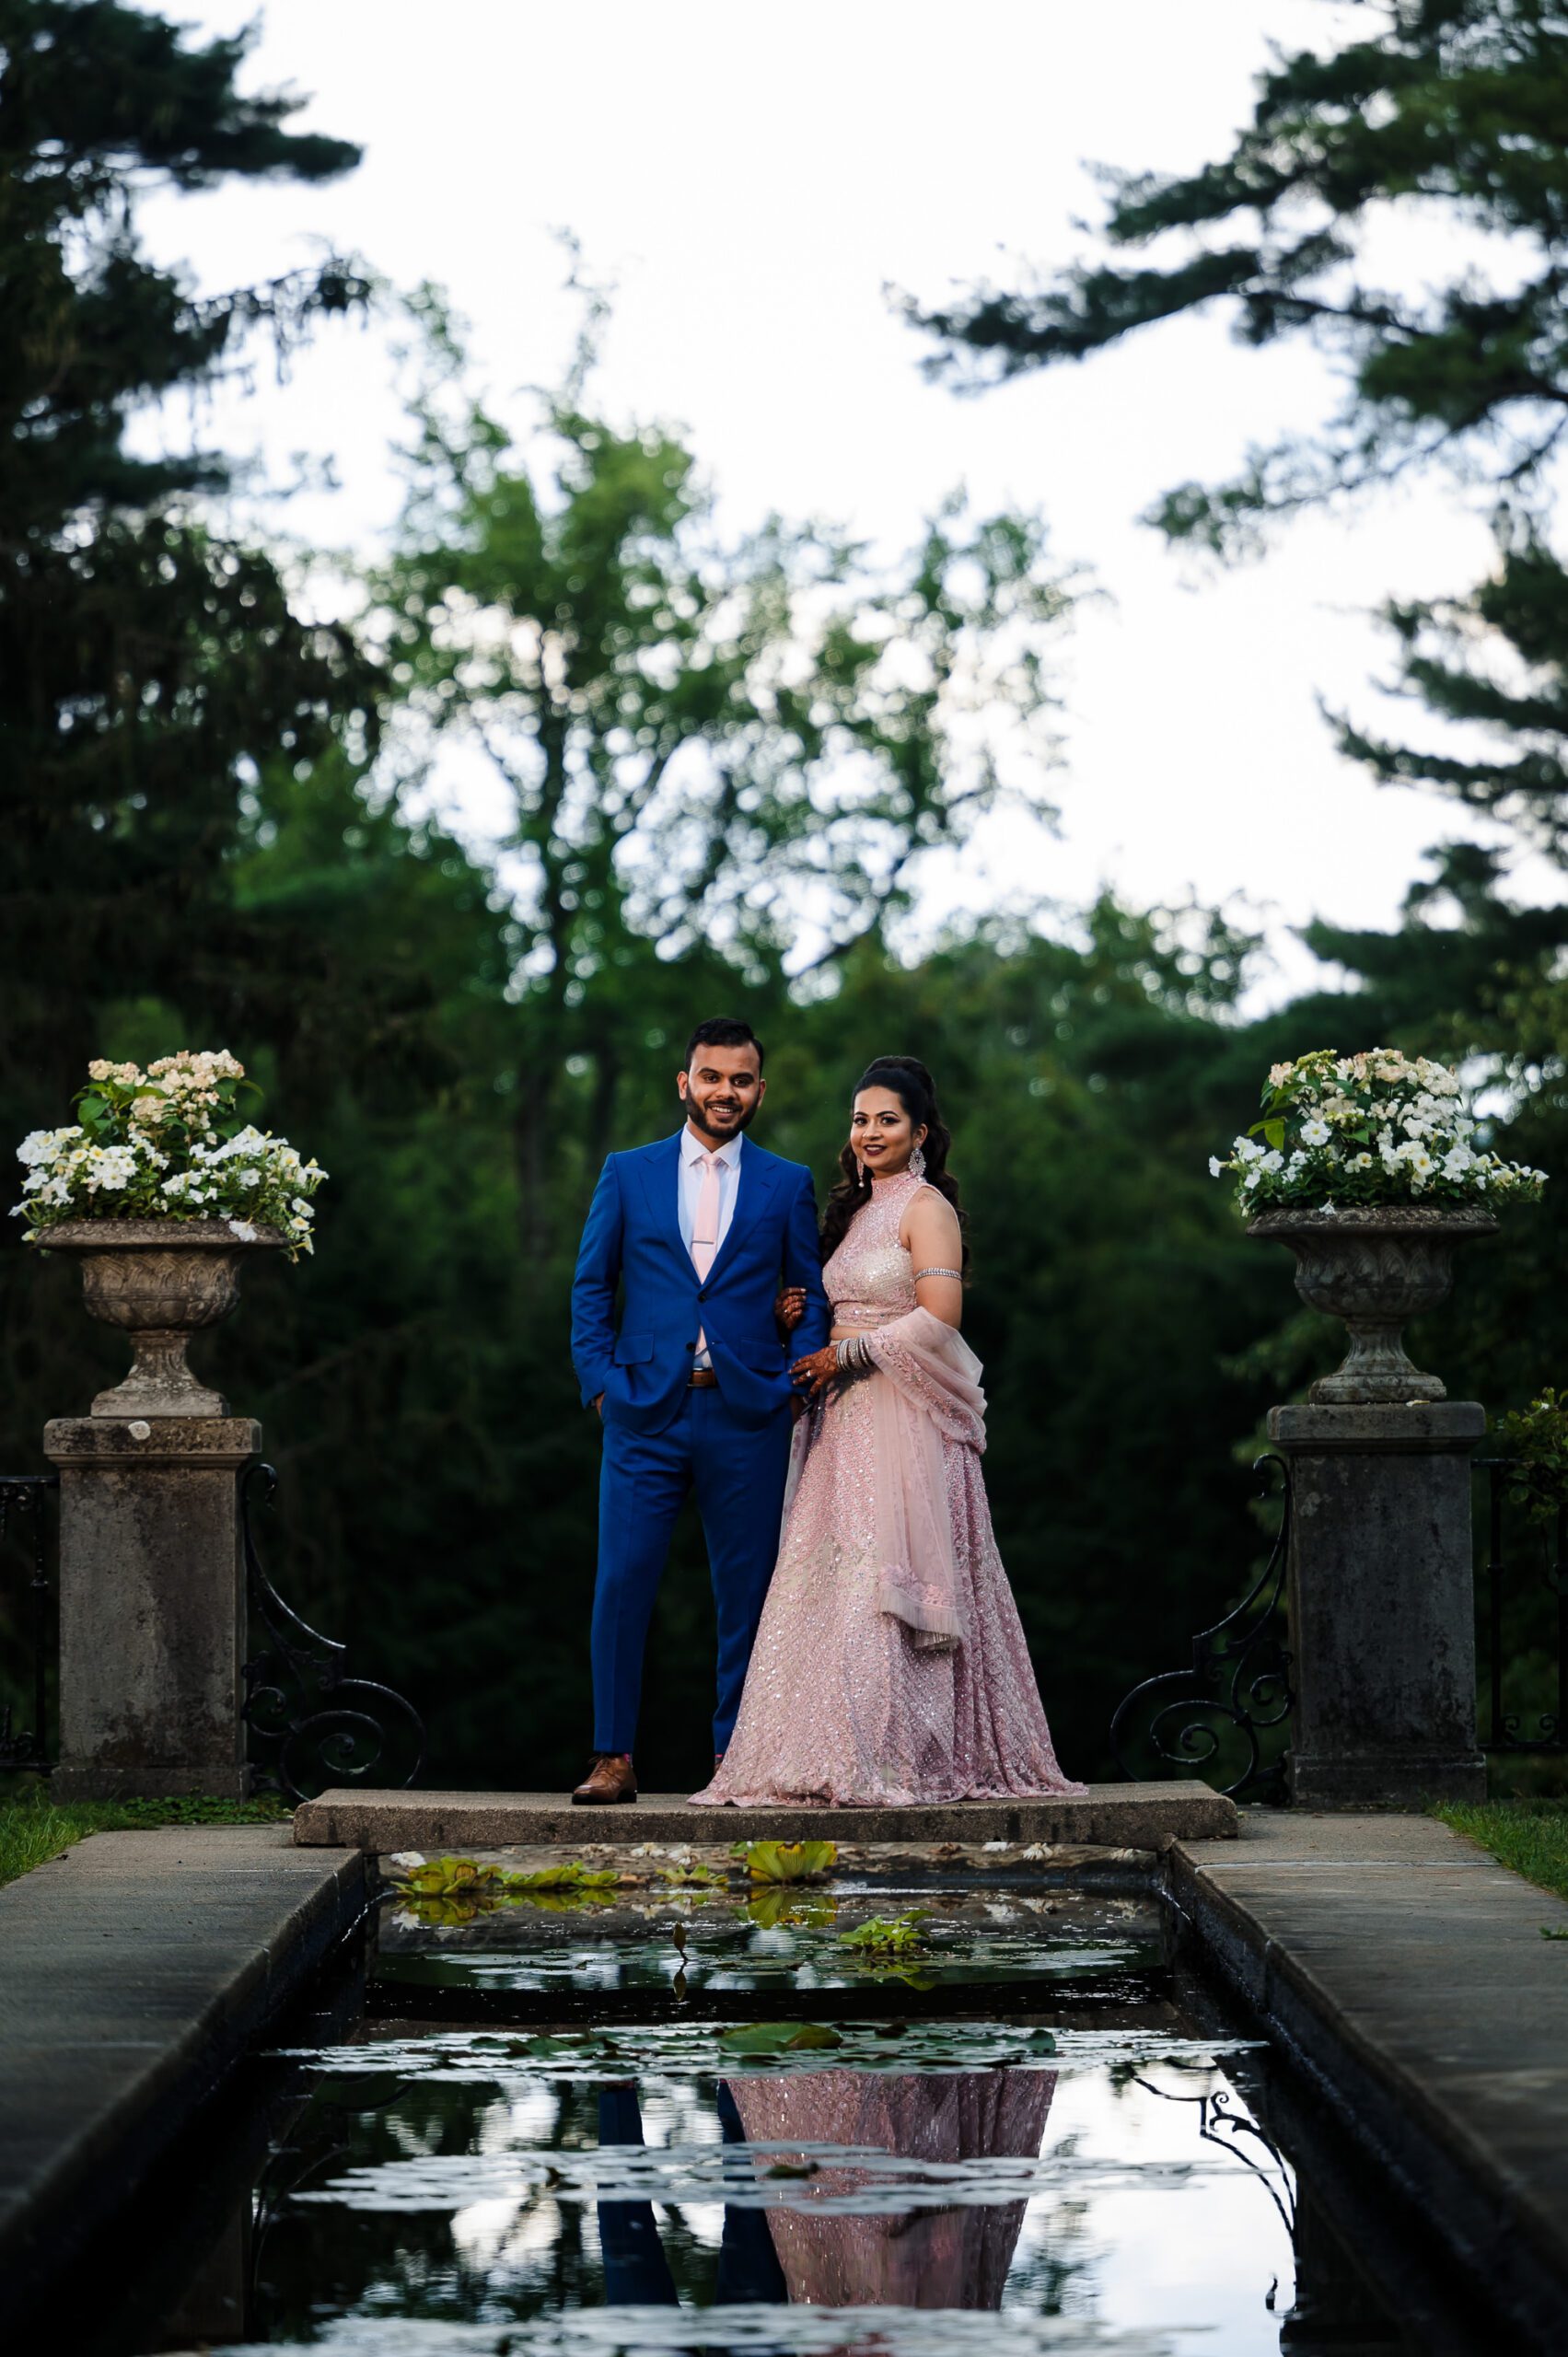 Indian bride and groom pose in elegant attire in front of Skylands Manor in New Jersey.